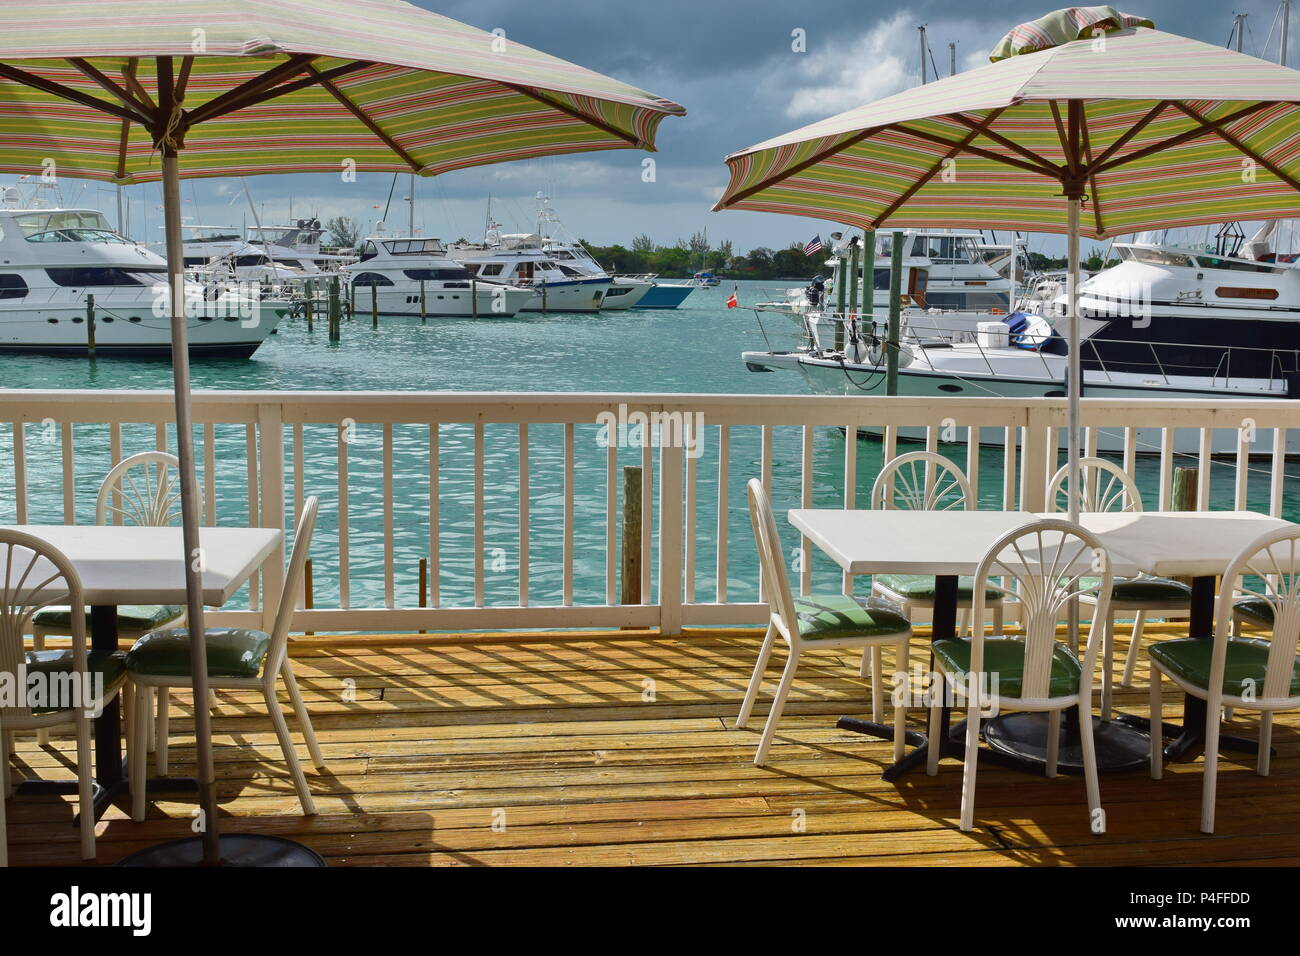 Seaside Restaurant outside next to yacht harbor in town of Marsh Harbour, Greater Abaco, Bahamas on bright sunny day. Stock Photo